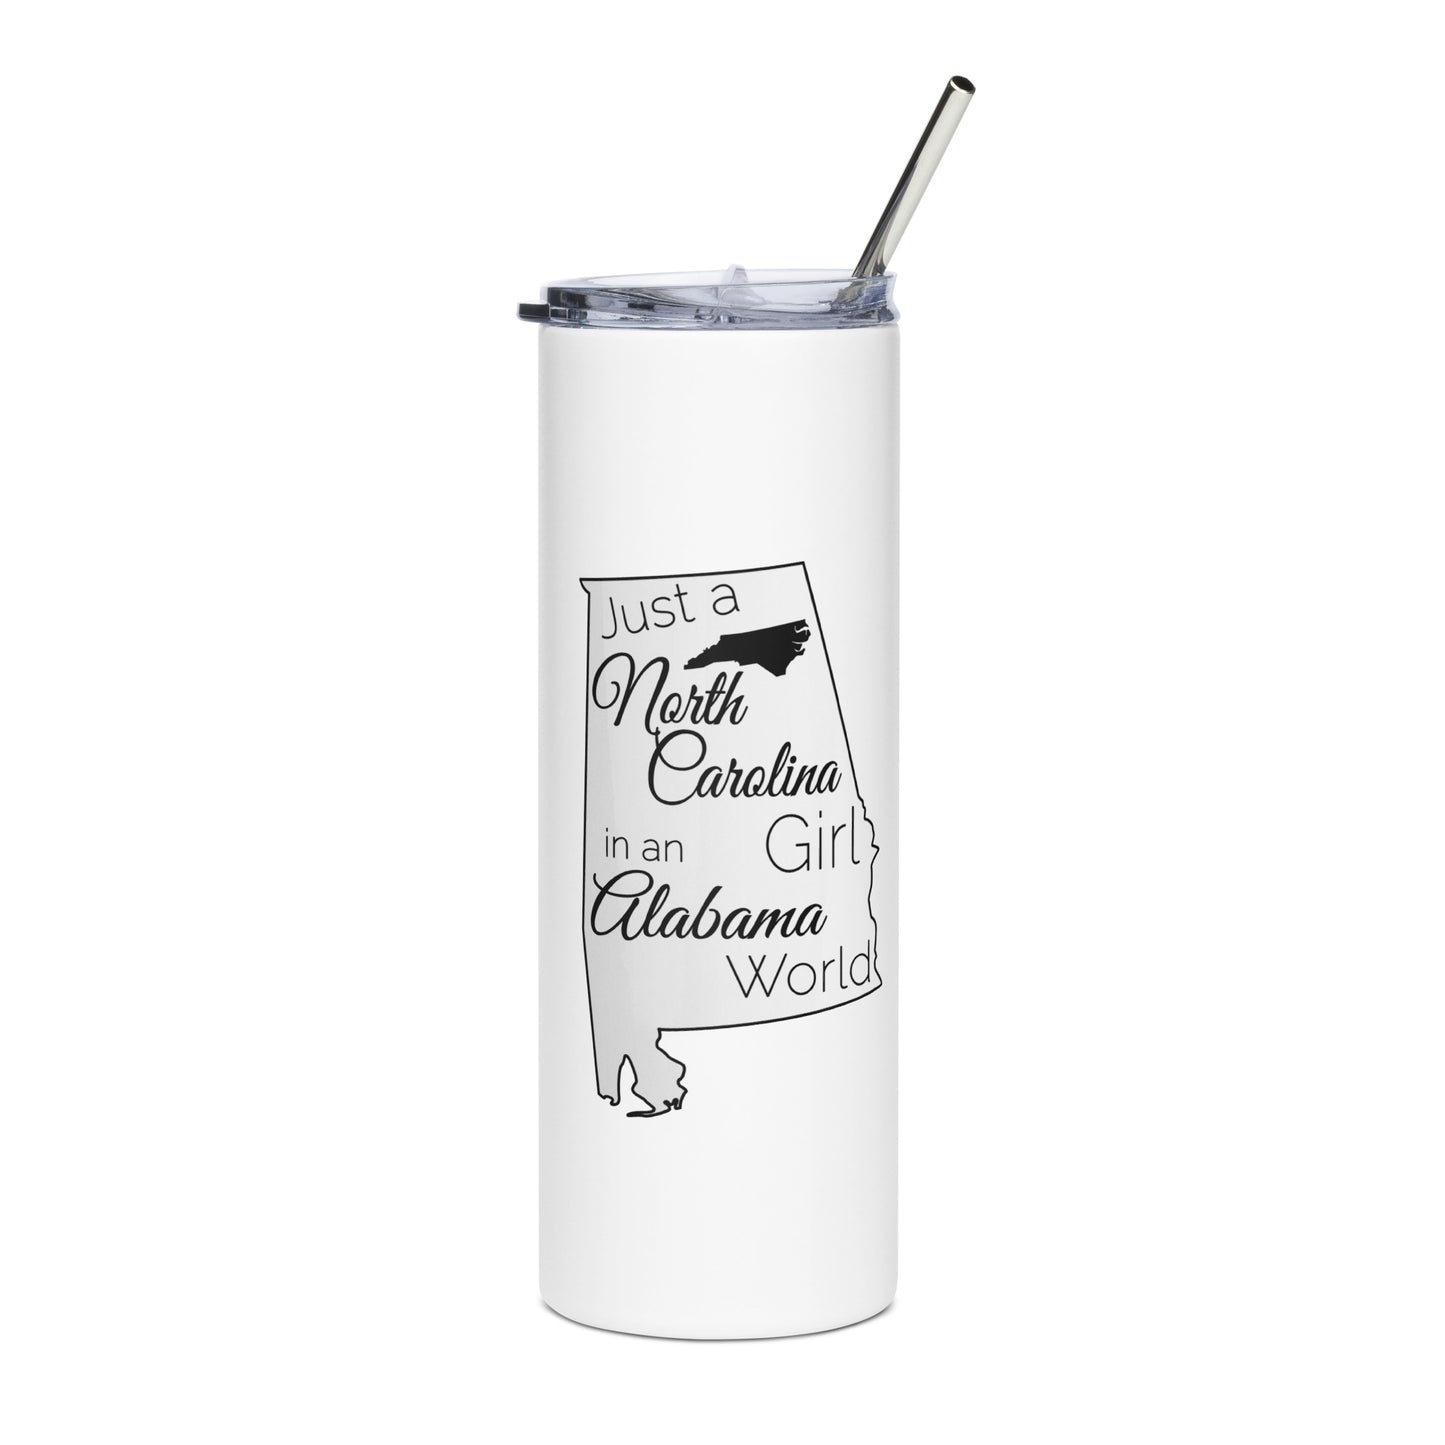 Just a North Carolina Girl in an Alabama World Stainless steel tumbler